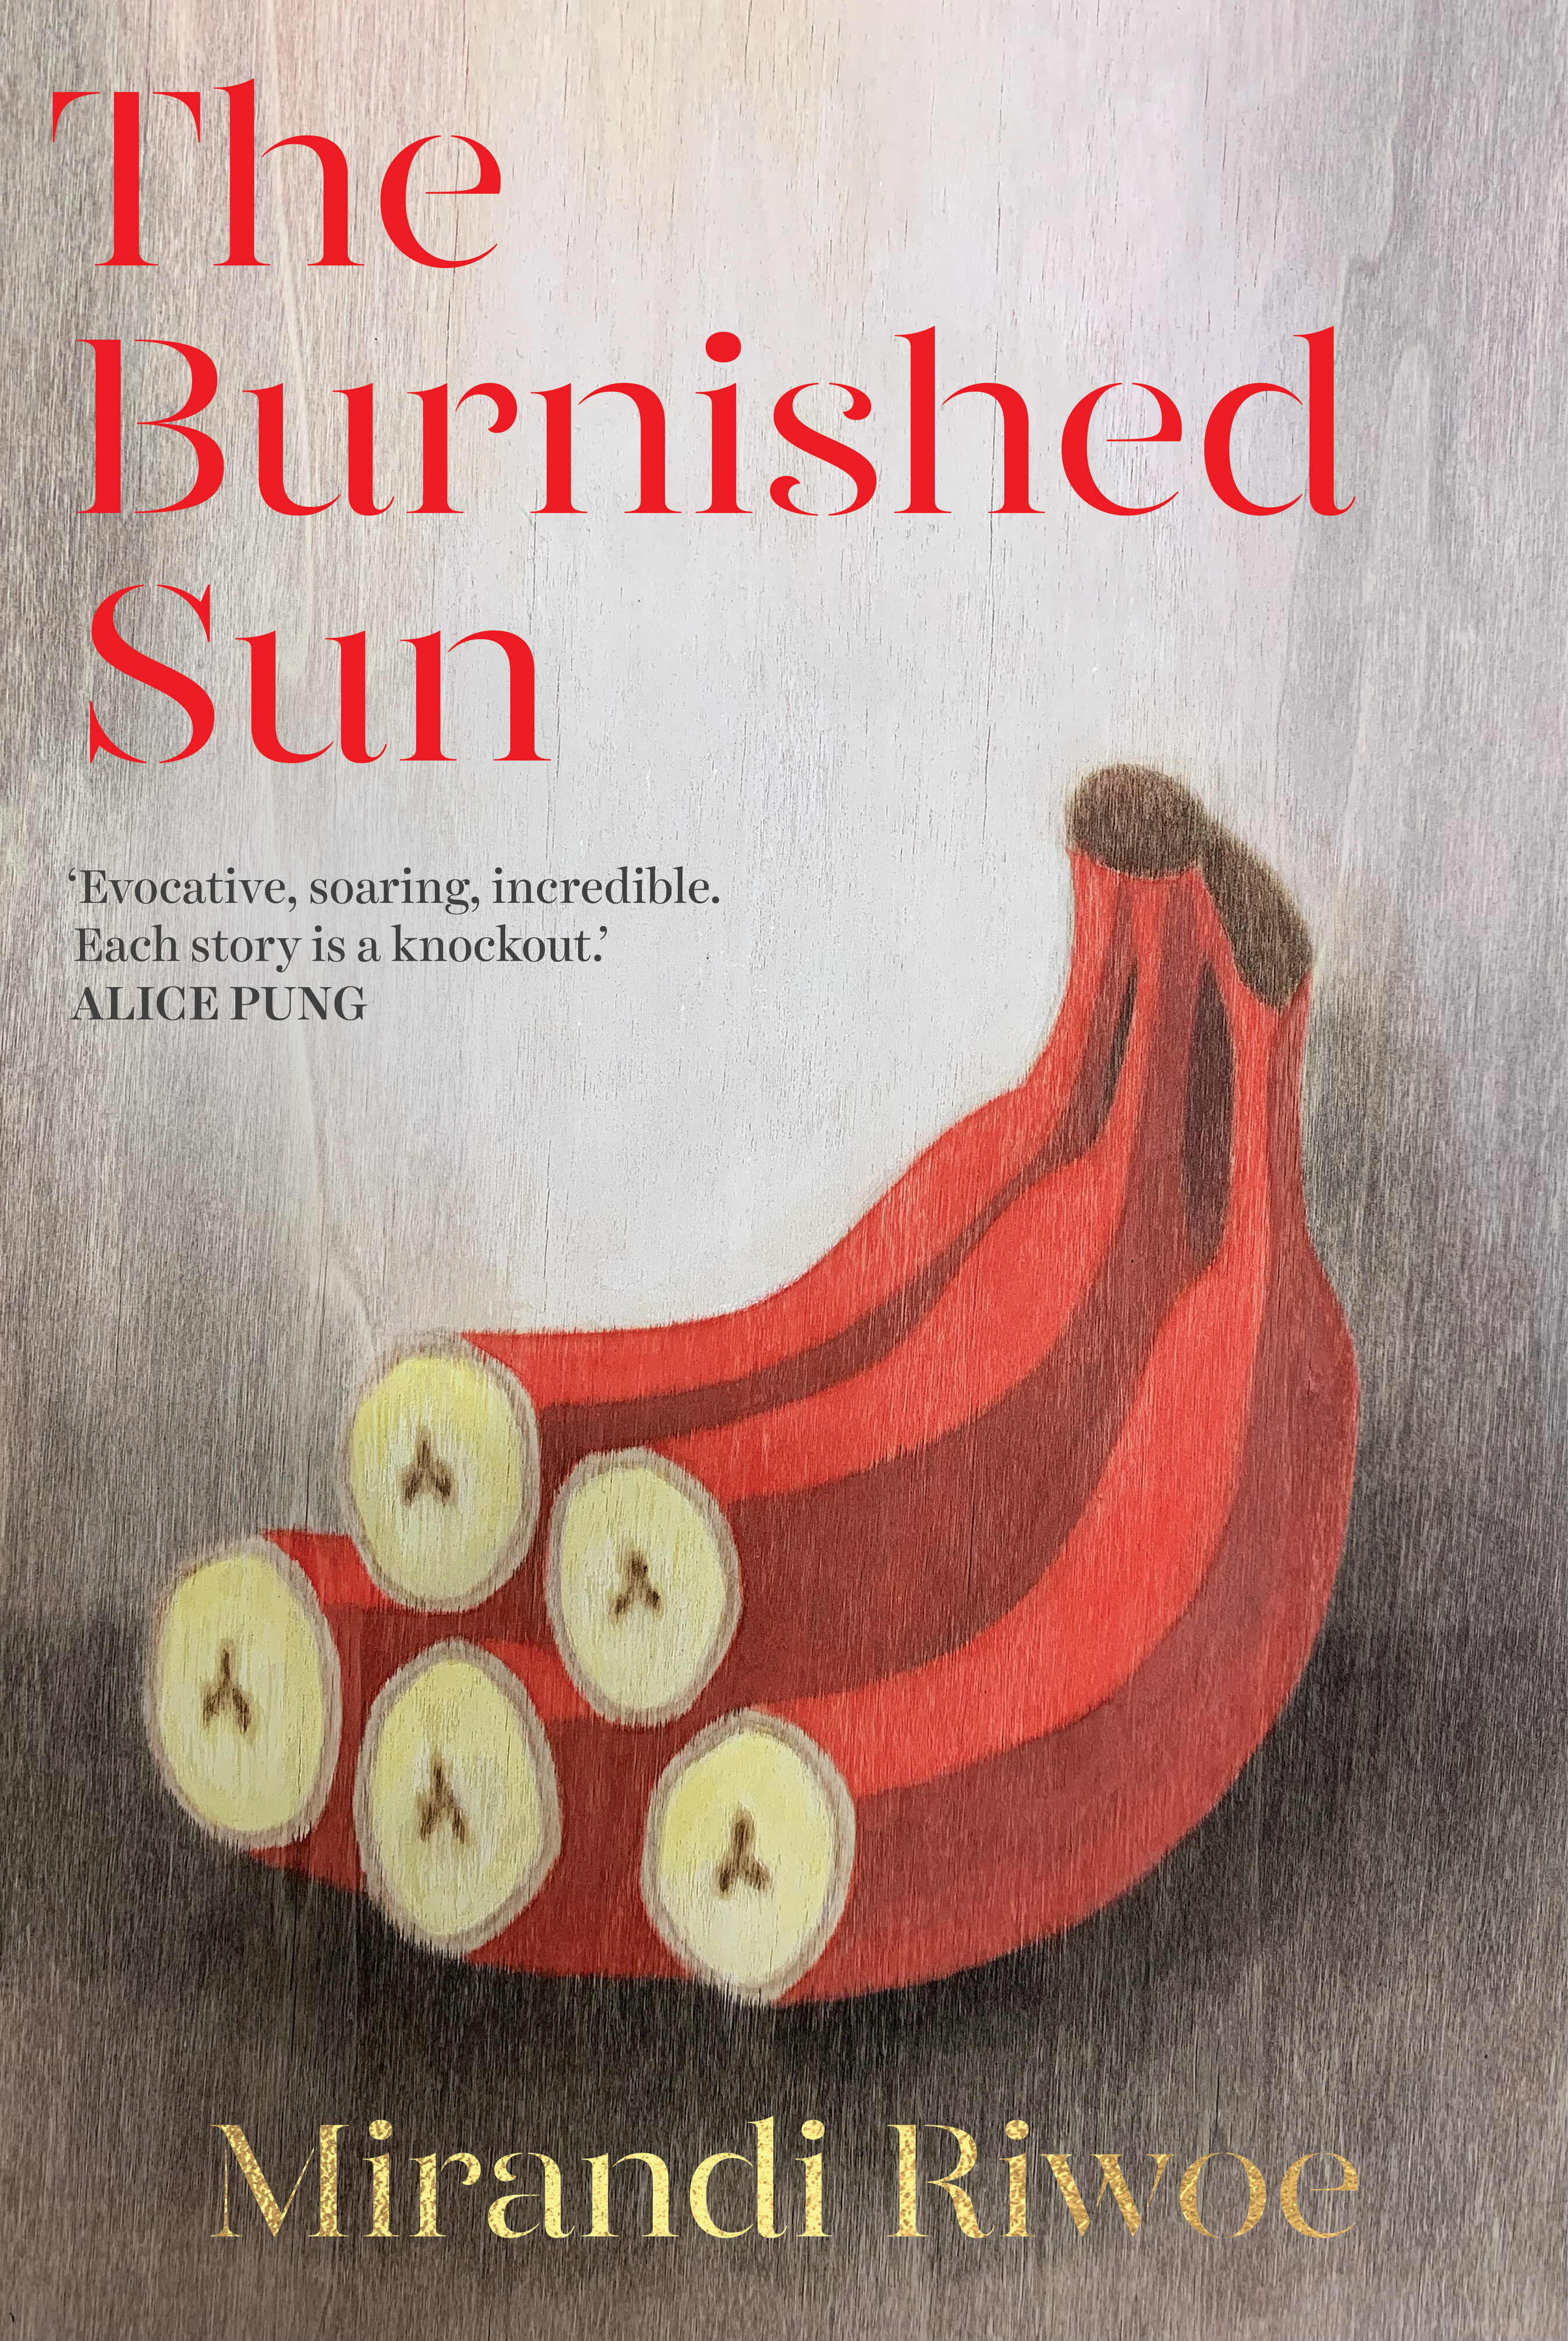 Cover of The Burnished Sun by Mirandi Riwoe. A grey shaded background with a bunch of red/orange bananas in the centre. The title is in red.